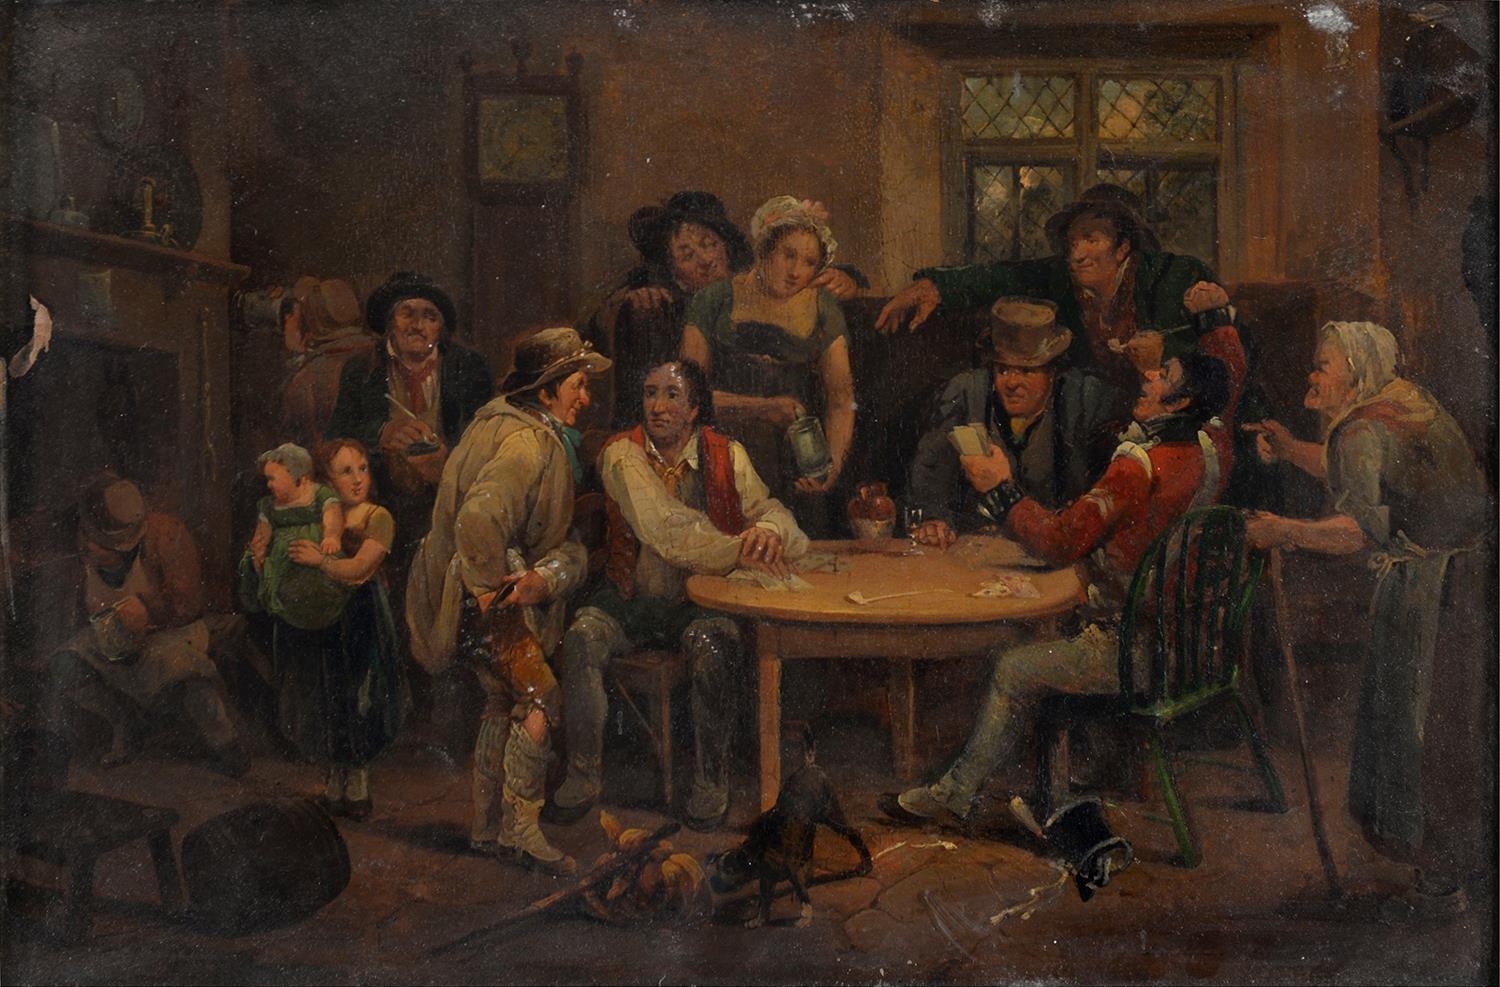 J WILLIS (FL EARLY 19TH C) - INTERIOR OF A COUNTRY INN WITH CARD PLAYERS, SIGNED (I WILLIS PINXT)